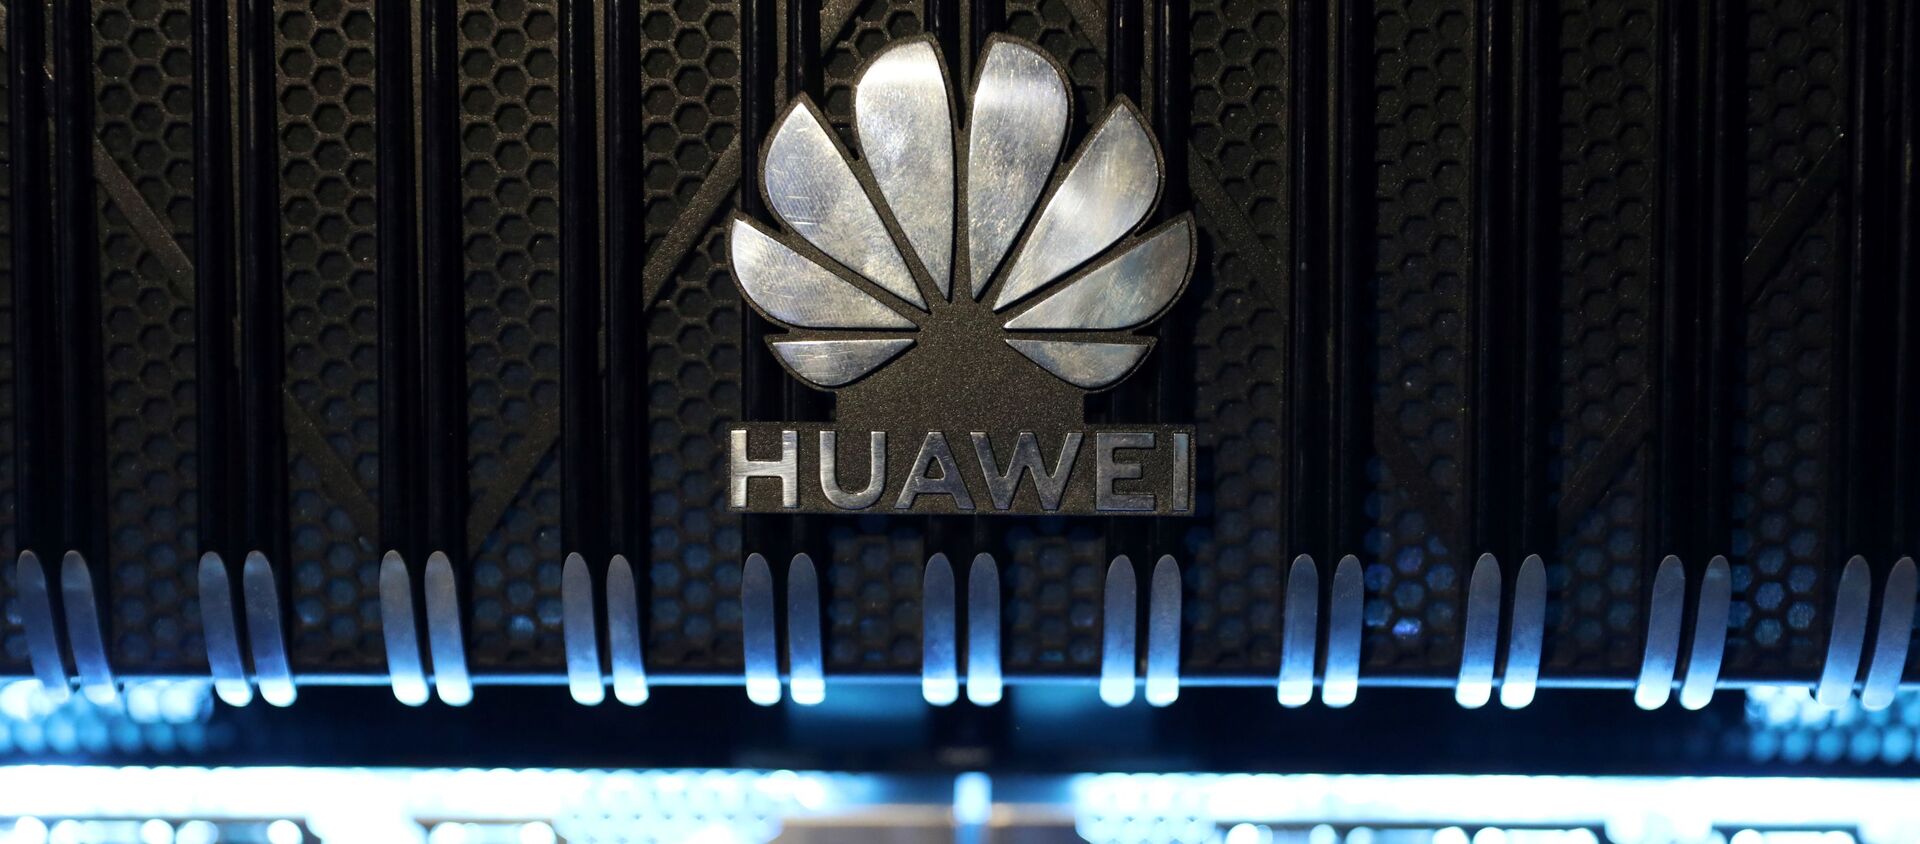 A logo is pictured on a Huawei NetEngine 8000 Intelligent Metro Router during a 5G event in London, on February 20, 2020 - Sputnik International, 1920, 27.04.2020